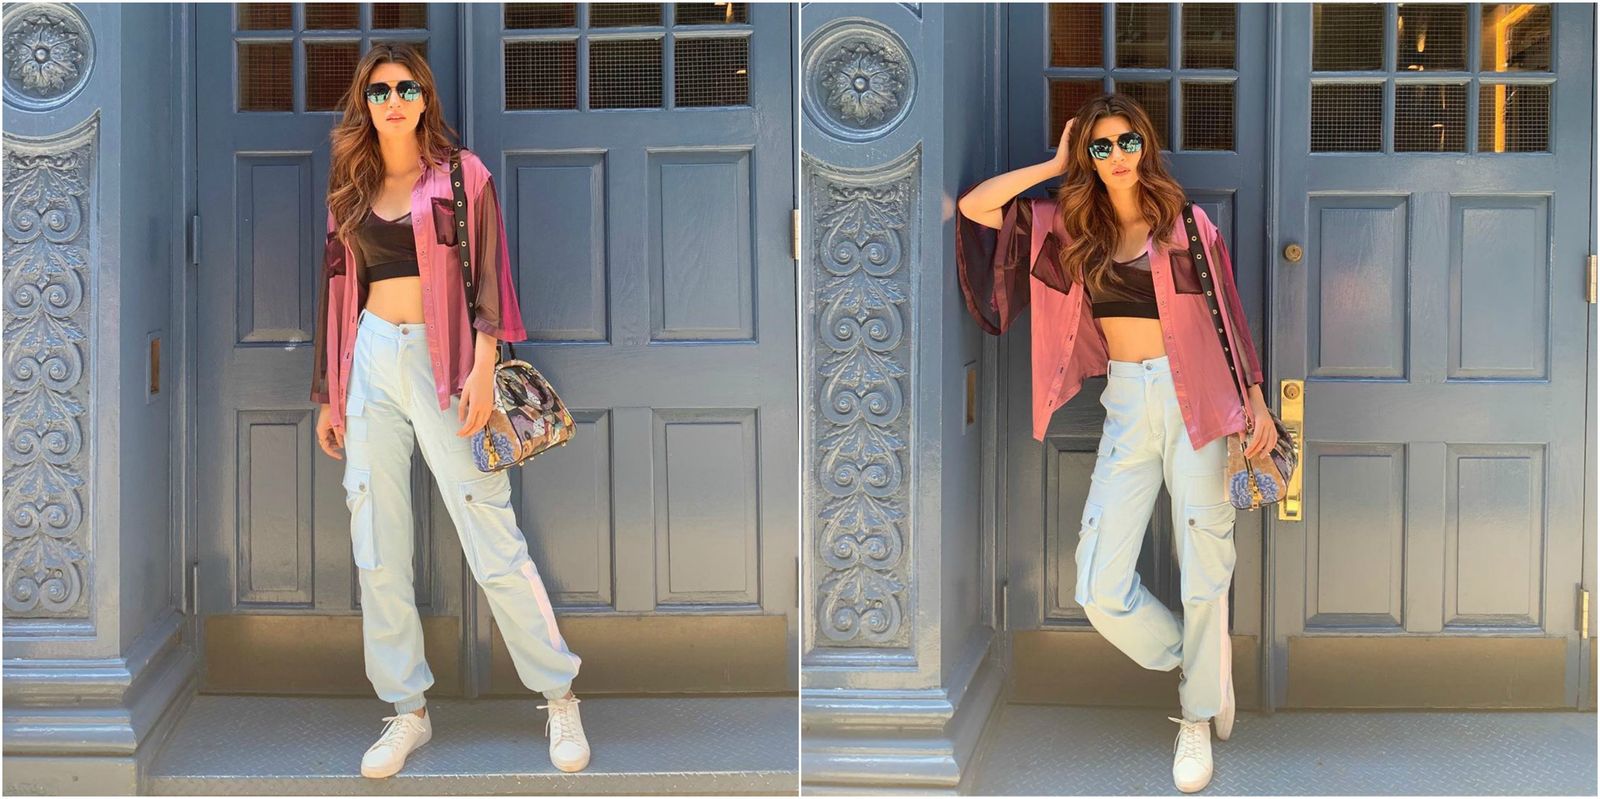 Kriti Sanon Street Style Moment In New York Is On Point, Here’s How You Can Get It